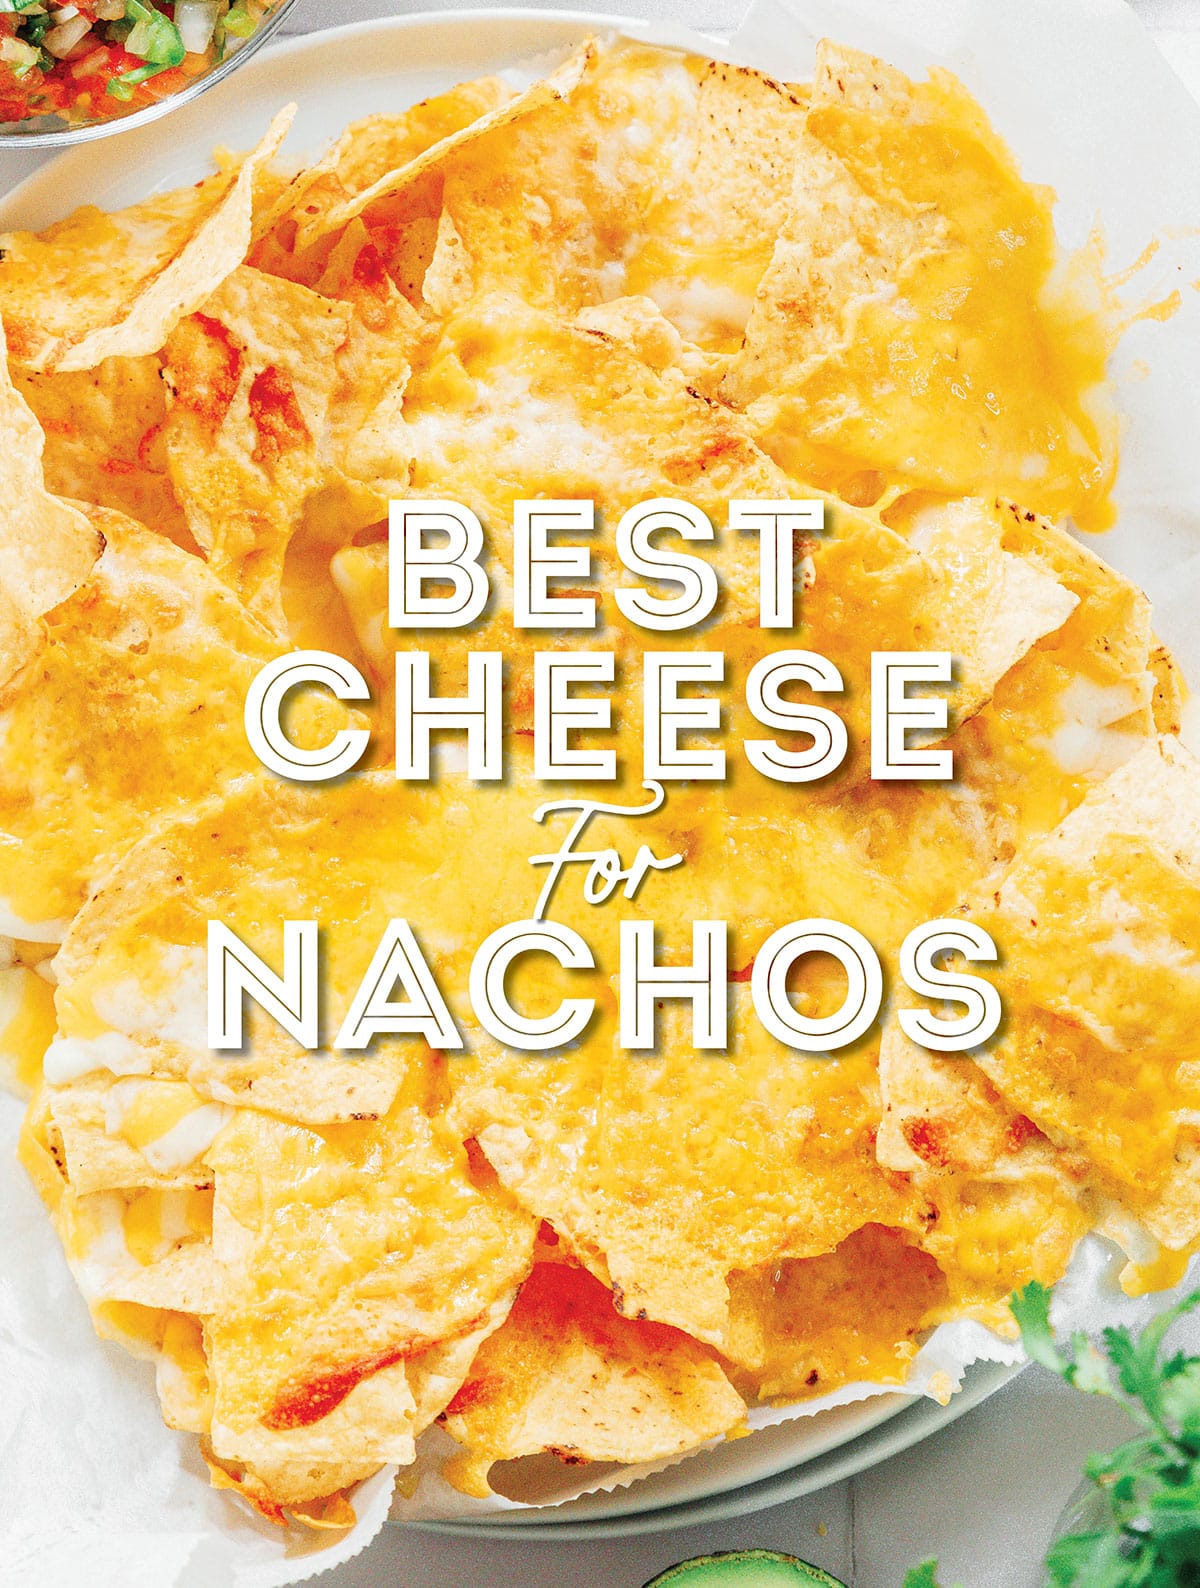 Collage that says "best cheese for nachos".